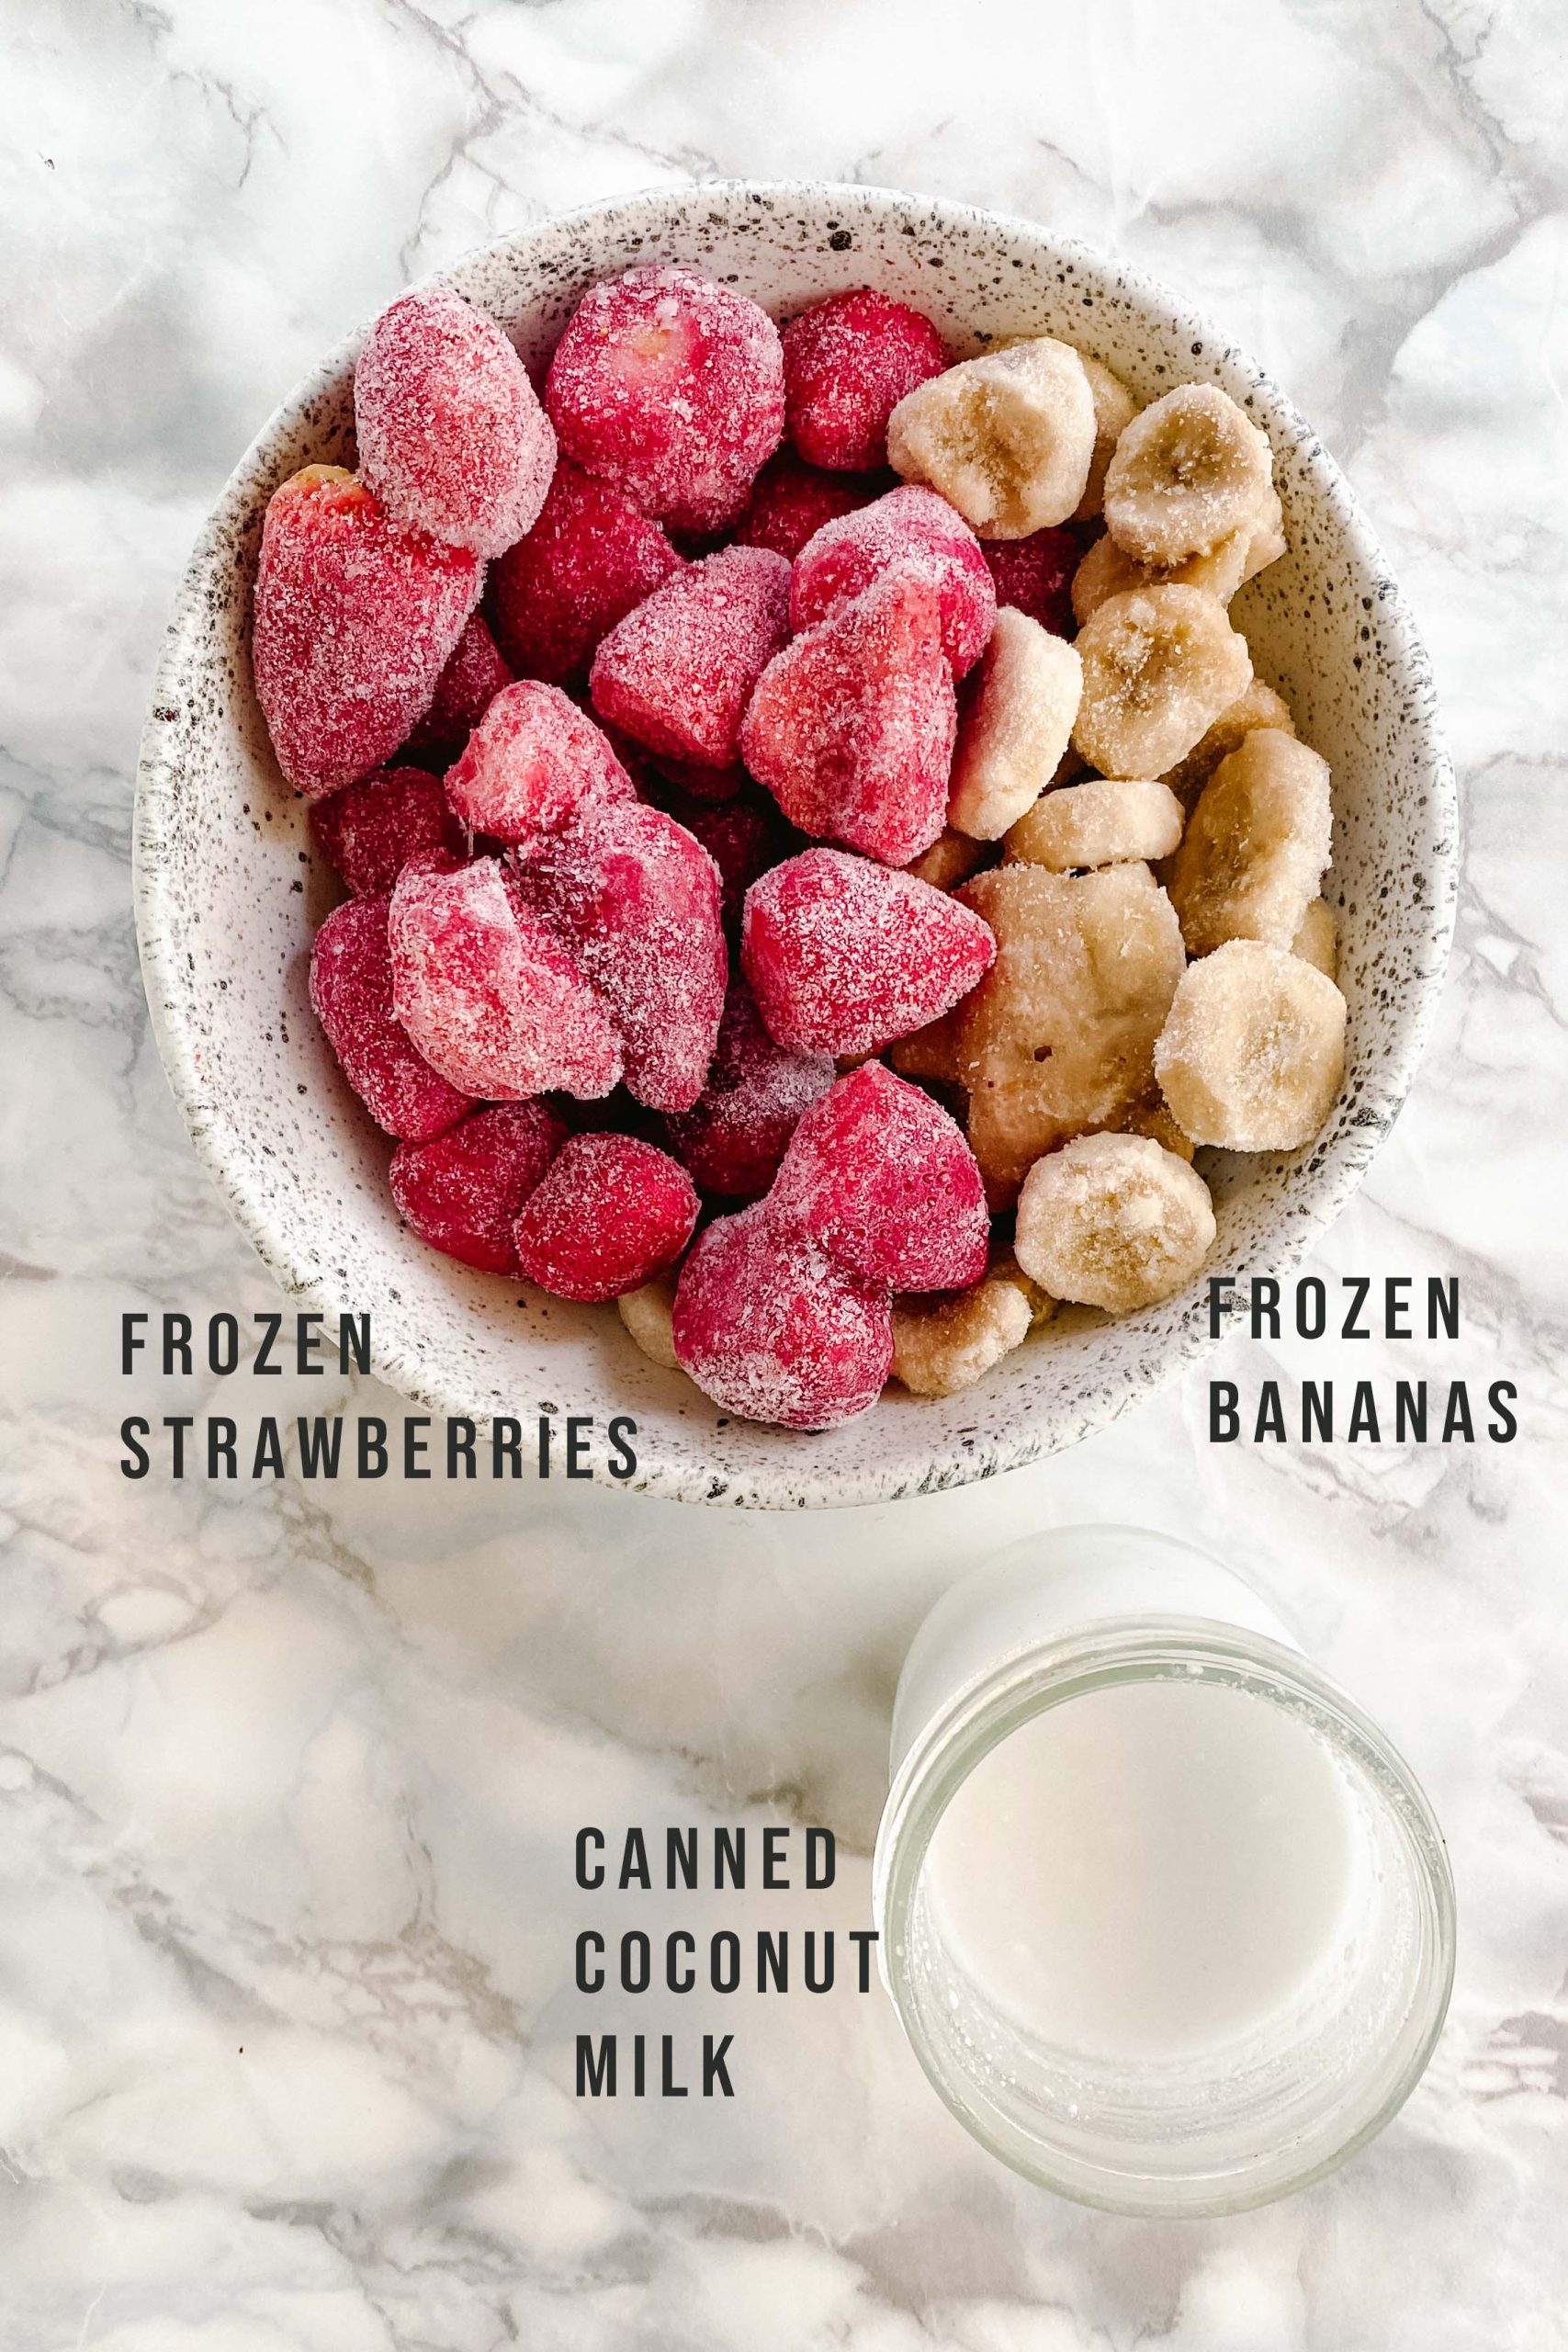 A bowl of frozen strawberries and bananas beside a jar of coconut milk on a white marble counter.